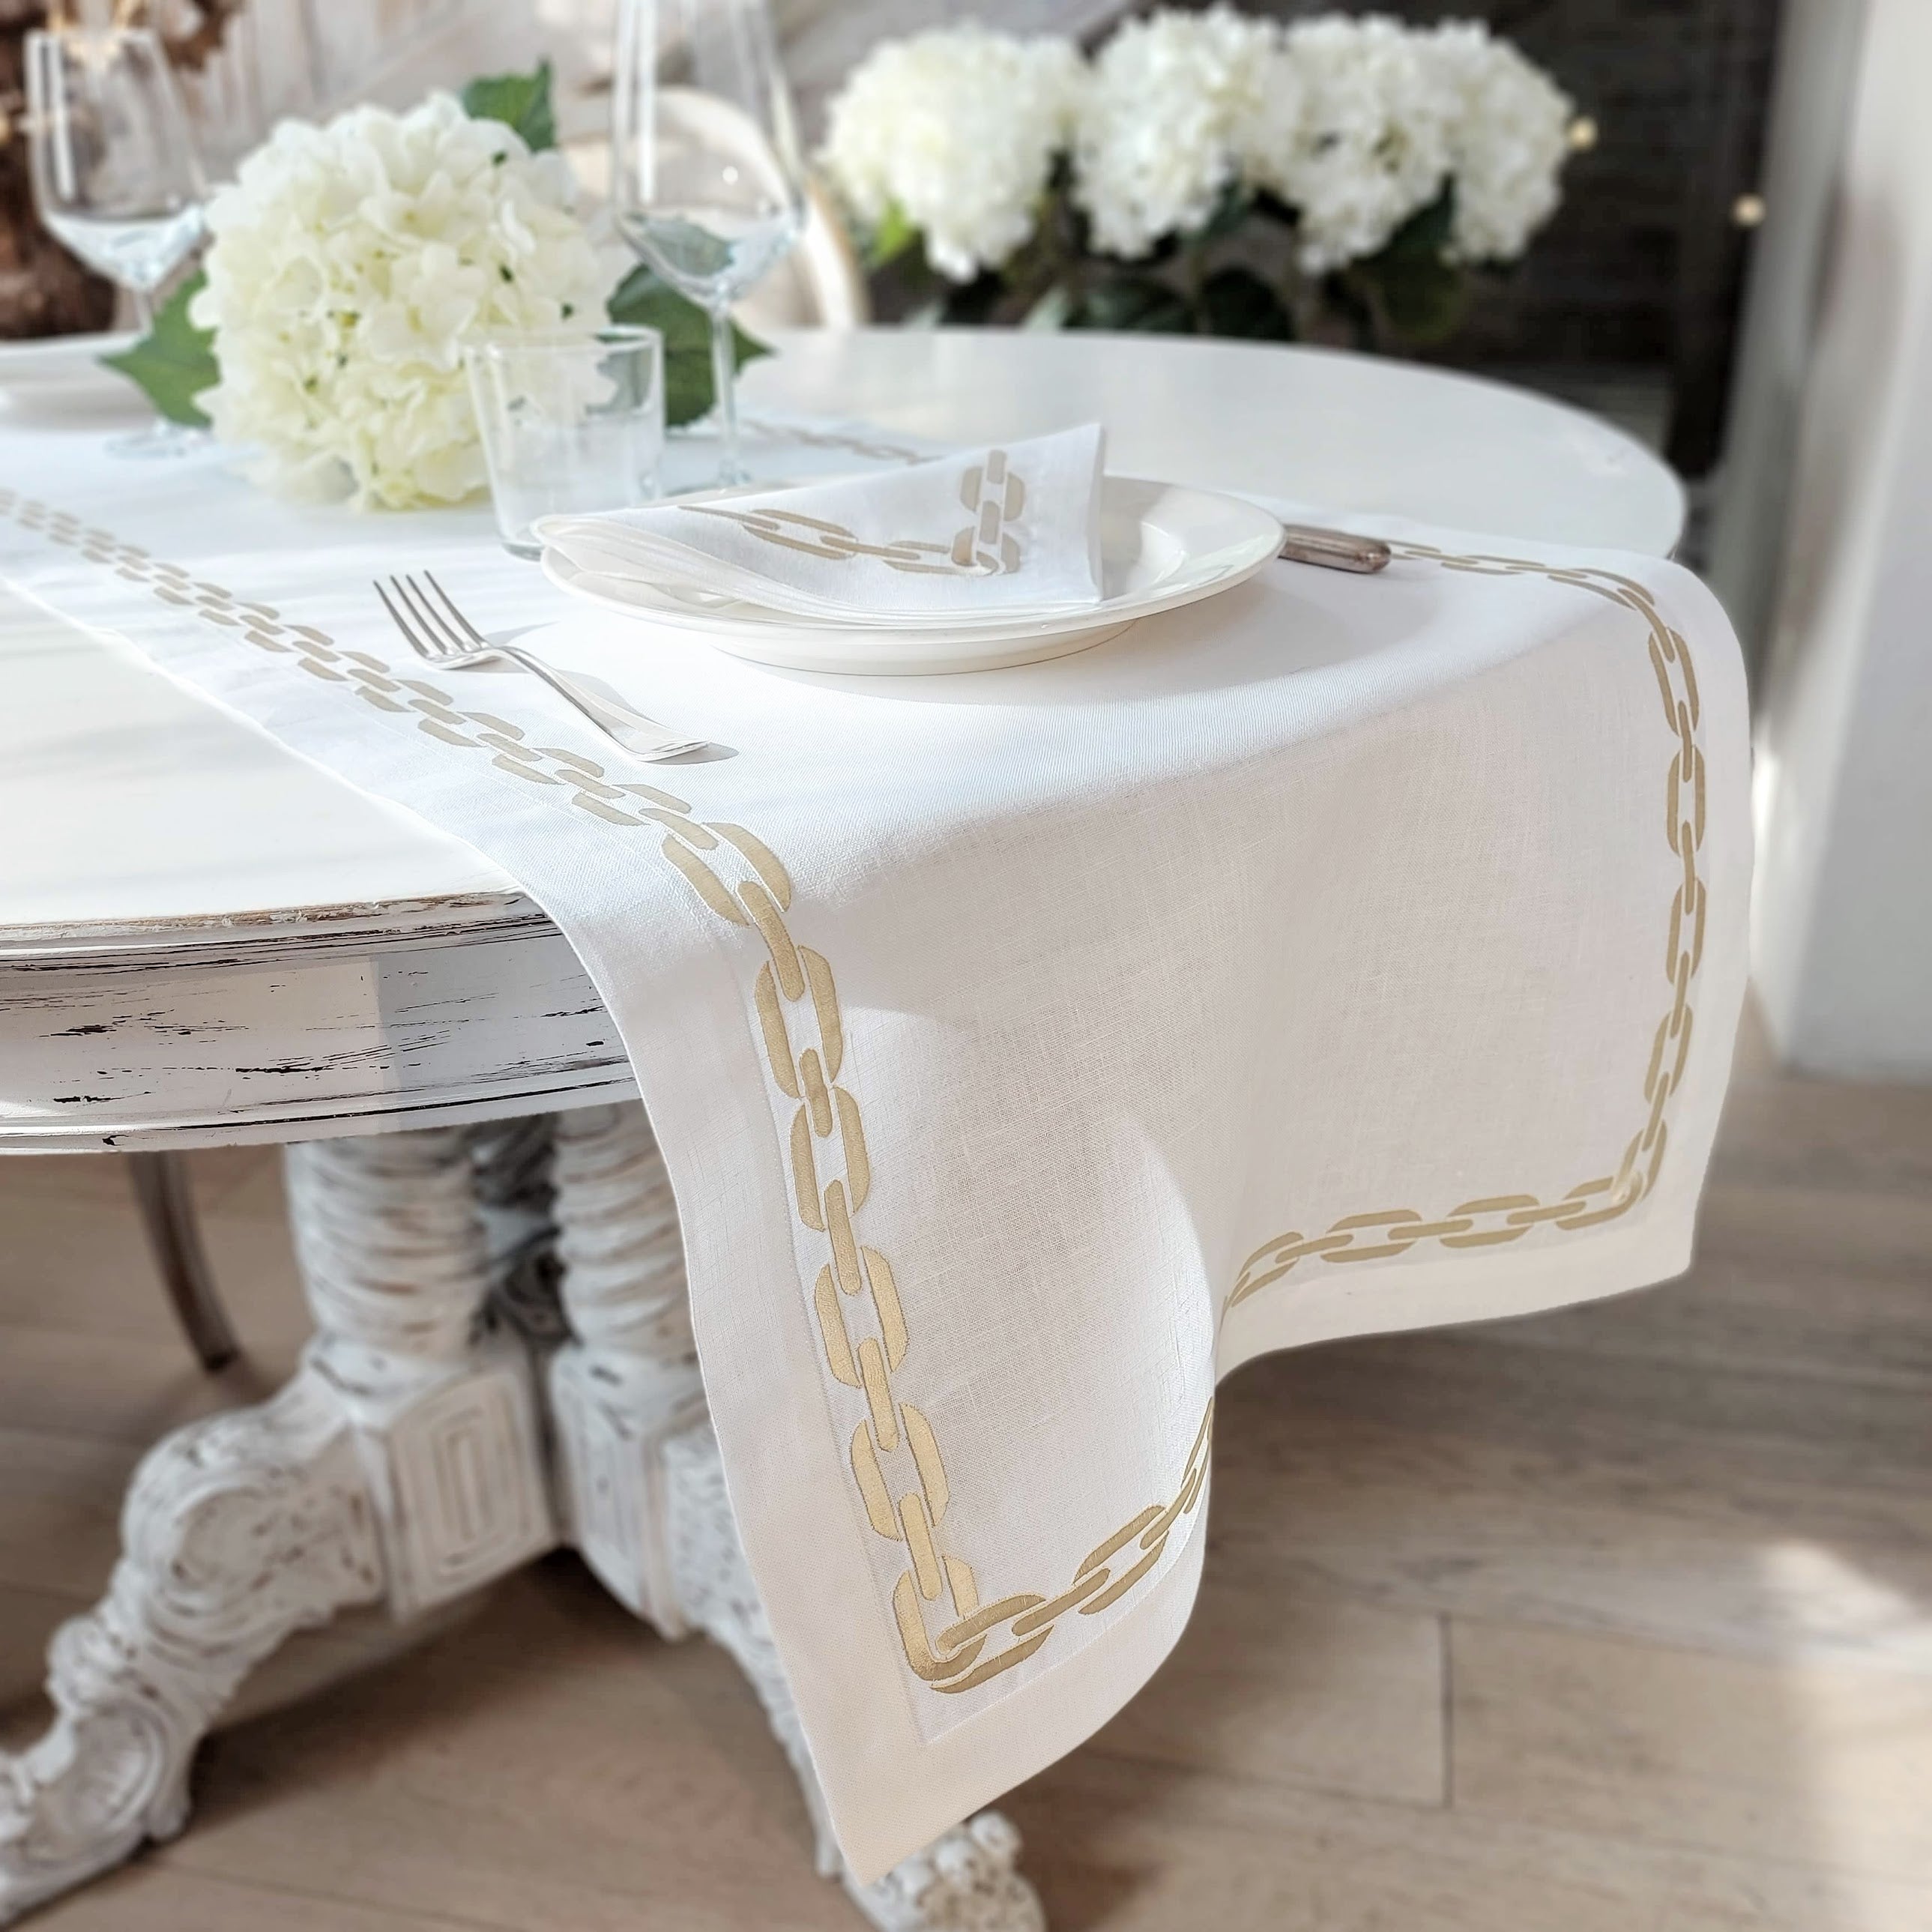 The Gold Chain Tablecloth